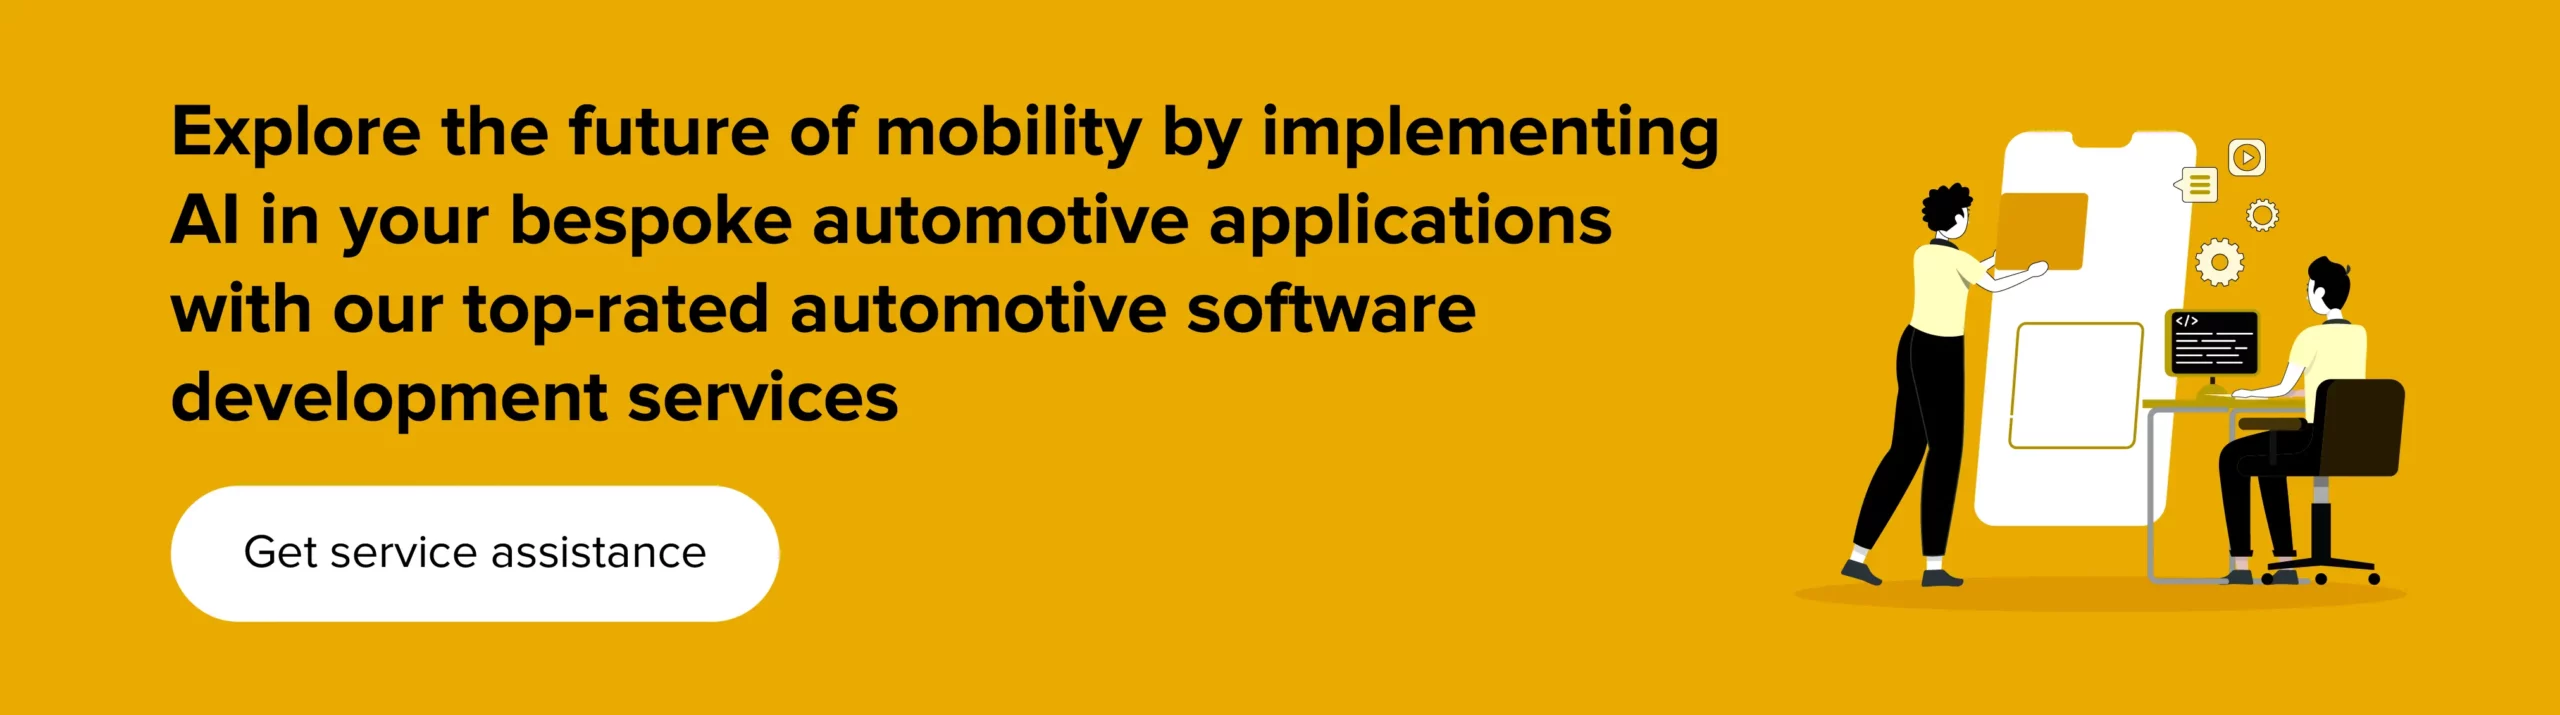 Implementing AI in bespoke automotive applications